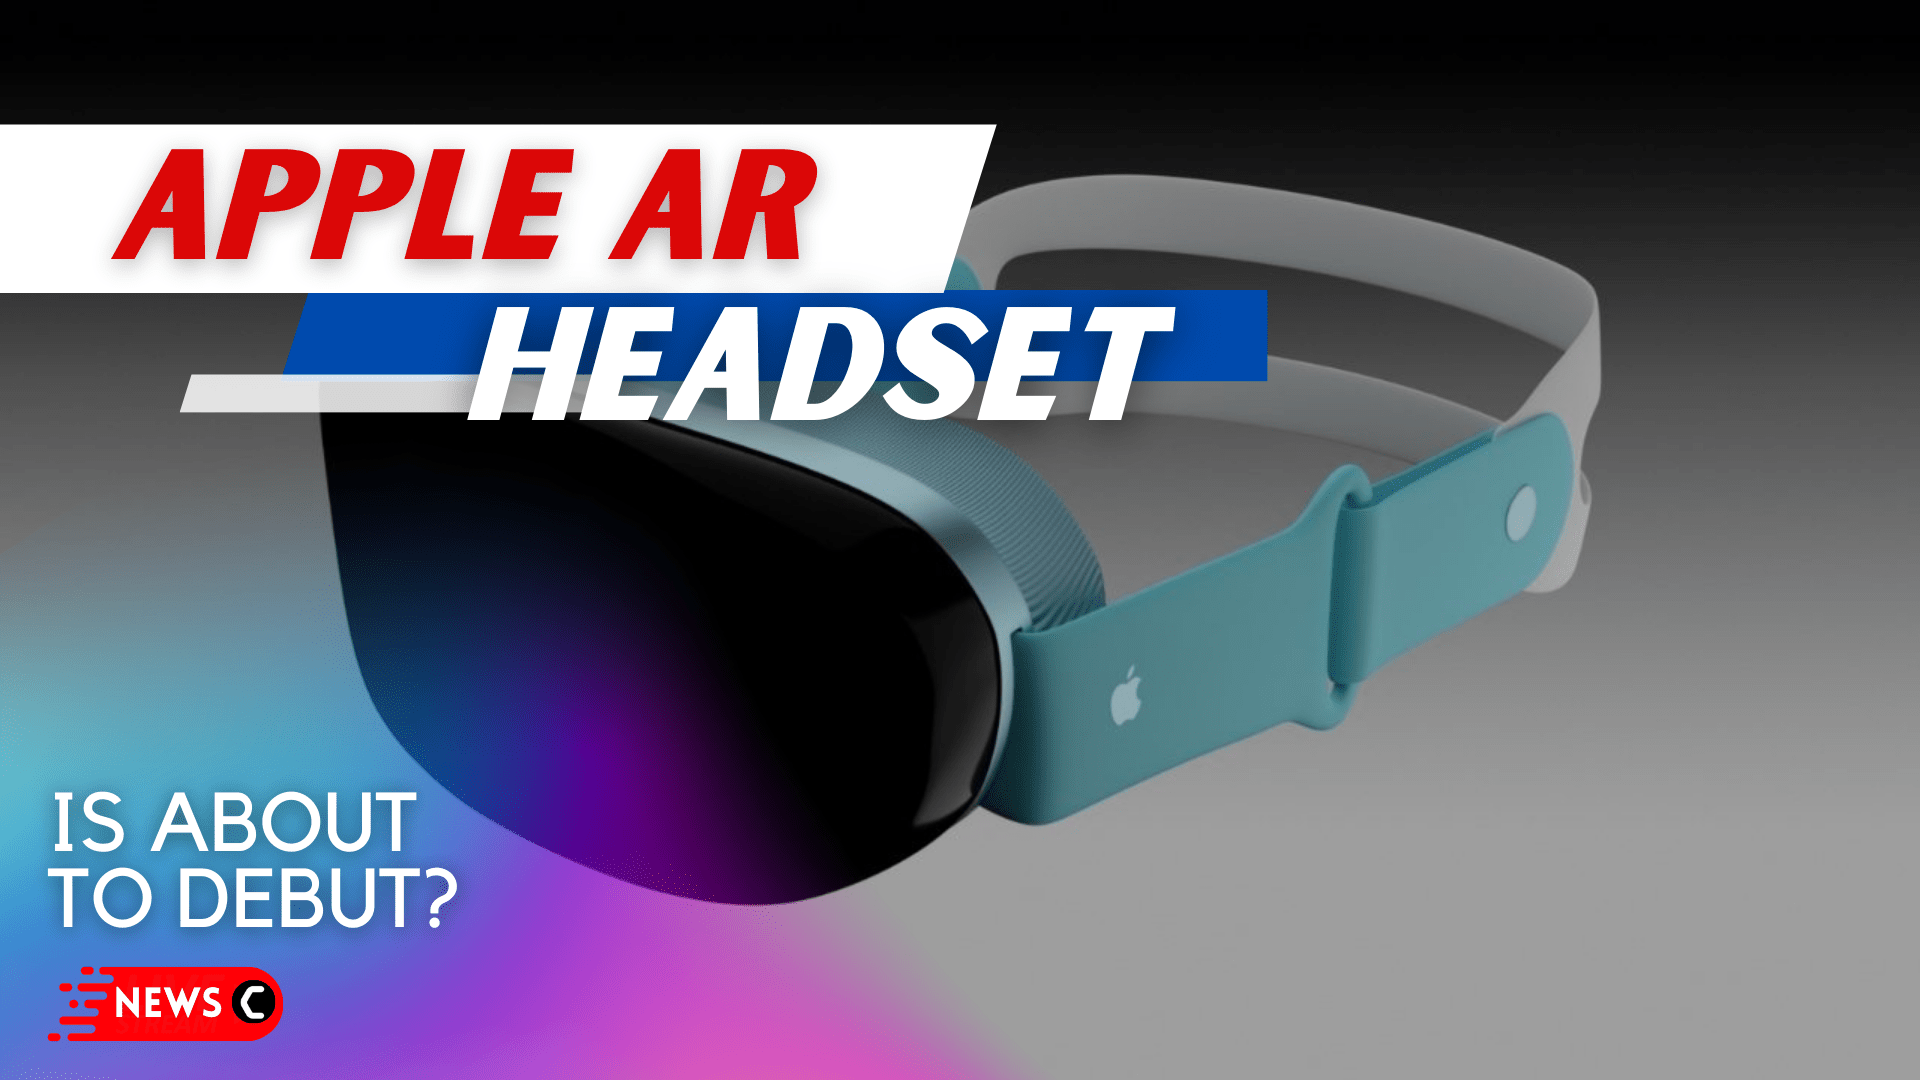 Is Apple about to debut its AR headset